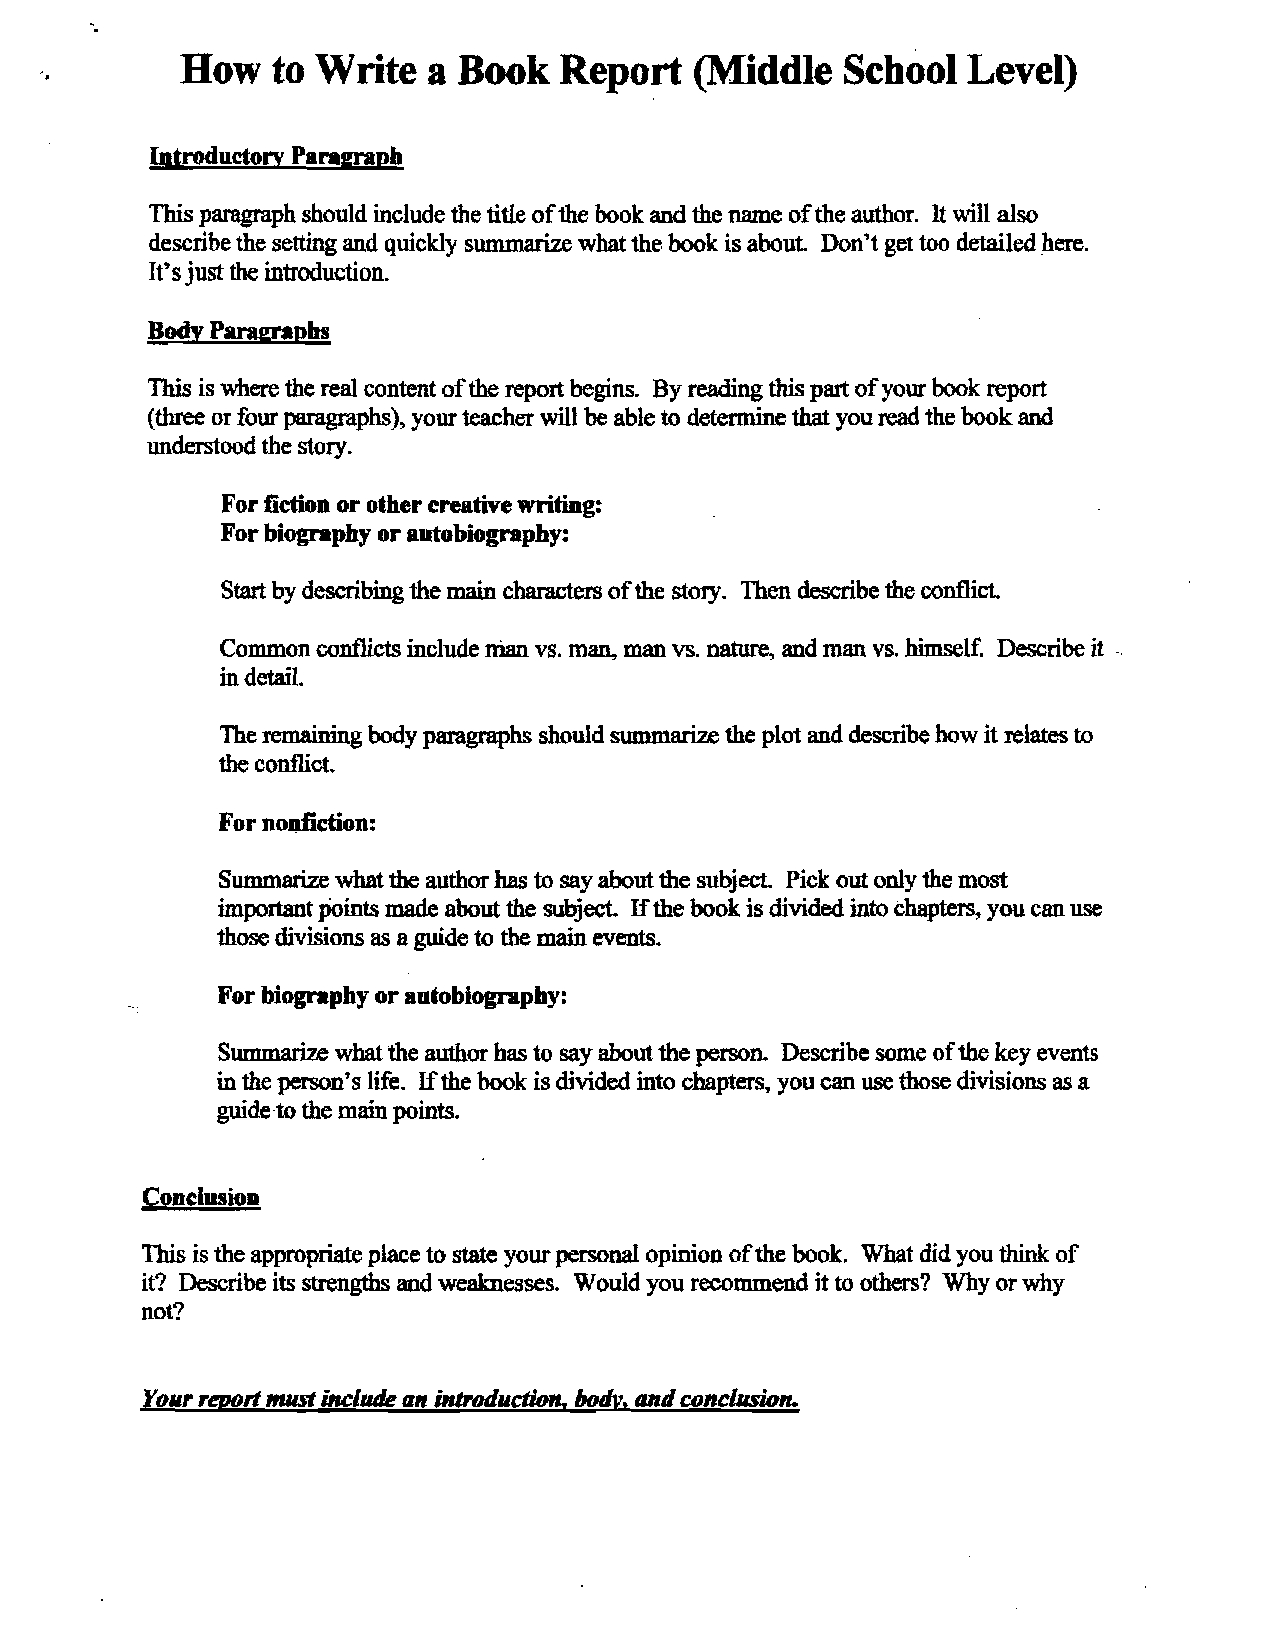 10 Awesome High School Book Report Ideas how to write a book report for high school the canterbury tales 1 2022